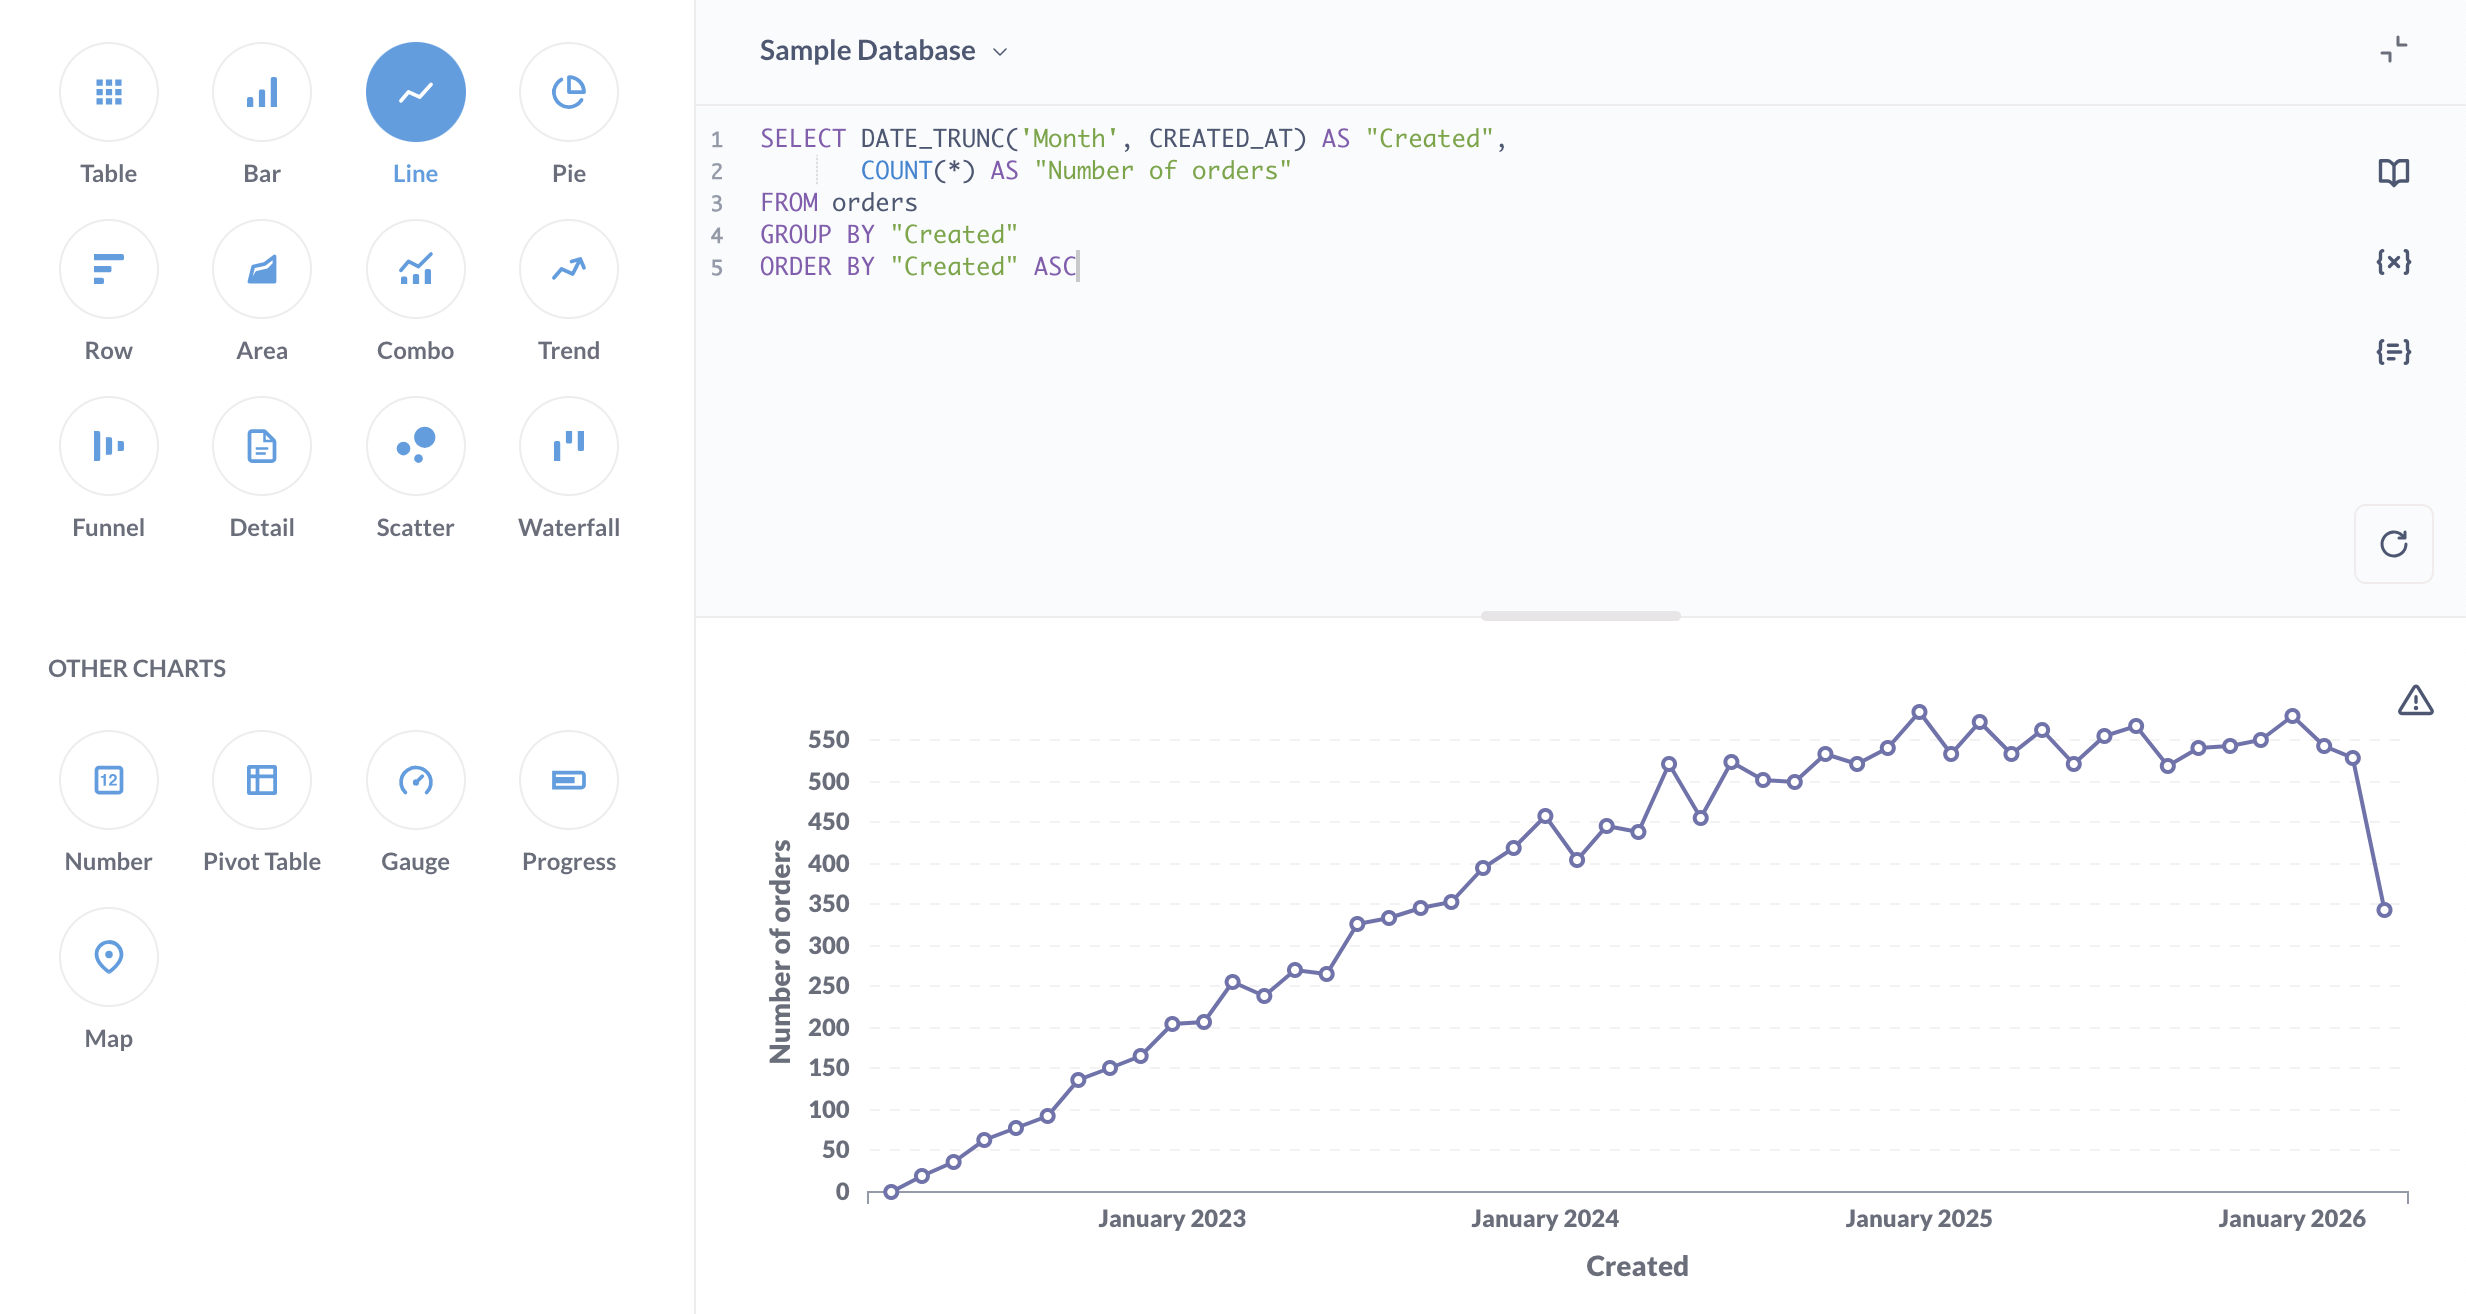 A question written in SQL showing orders per month, visualized as a line chart.